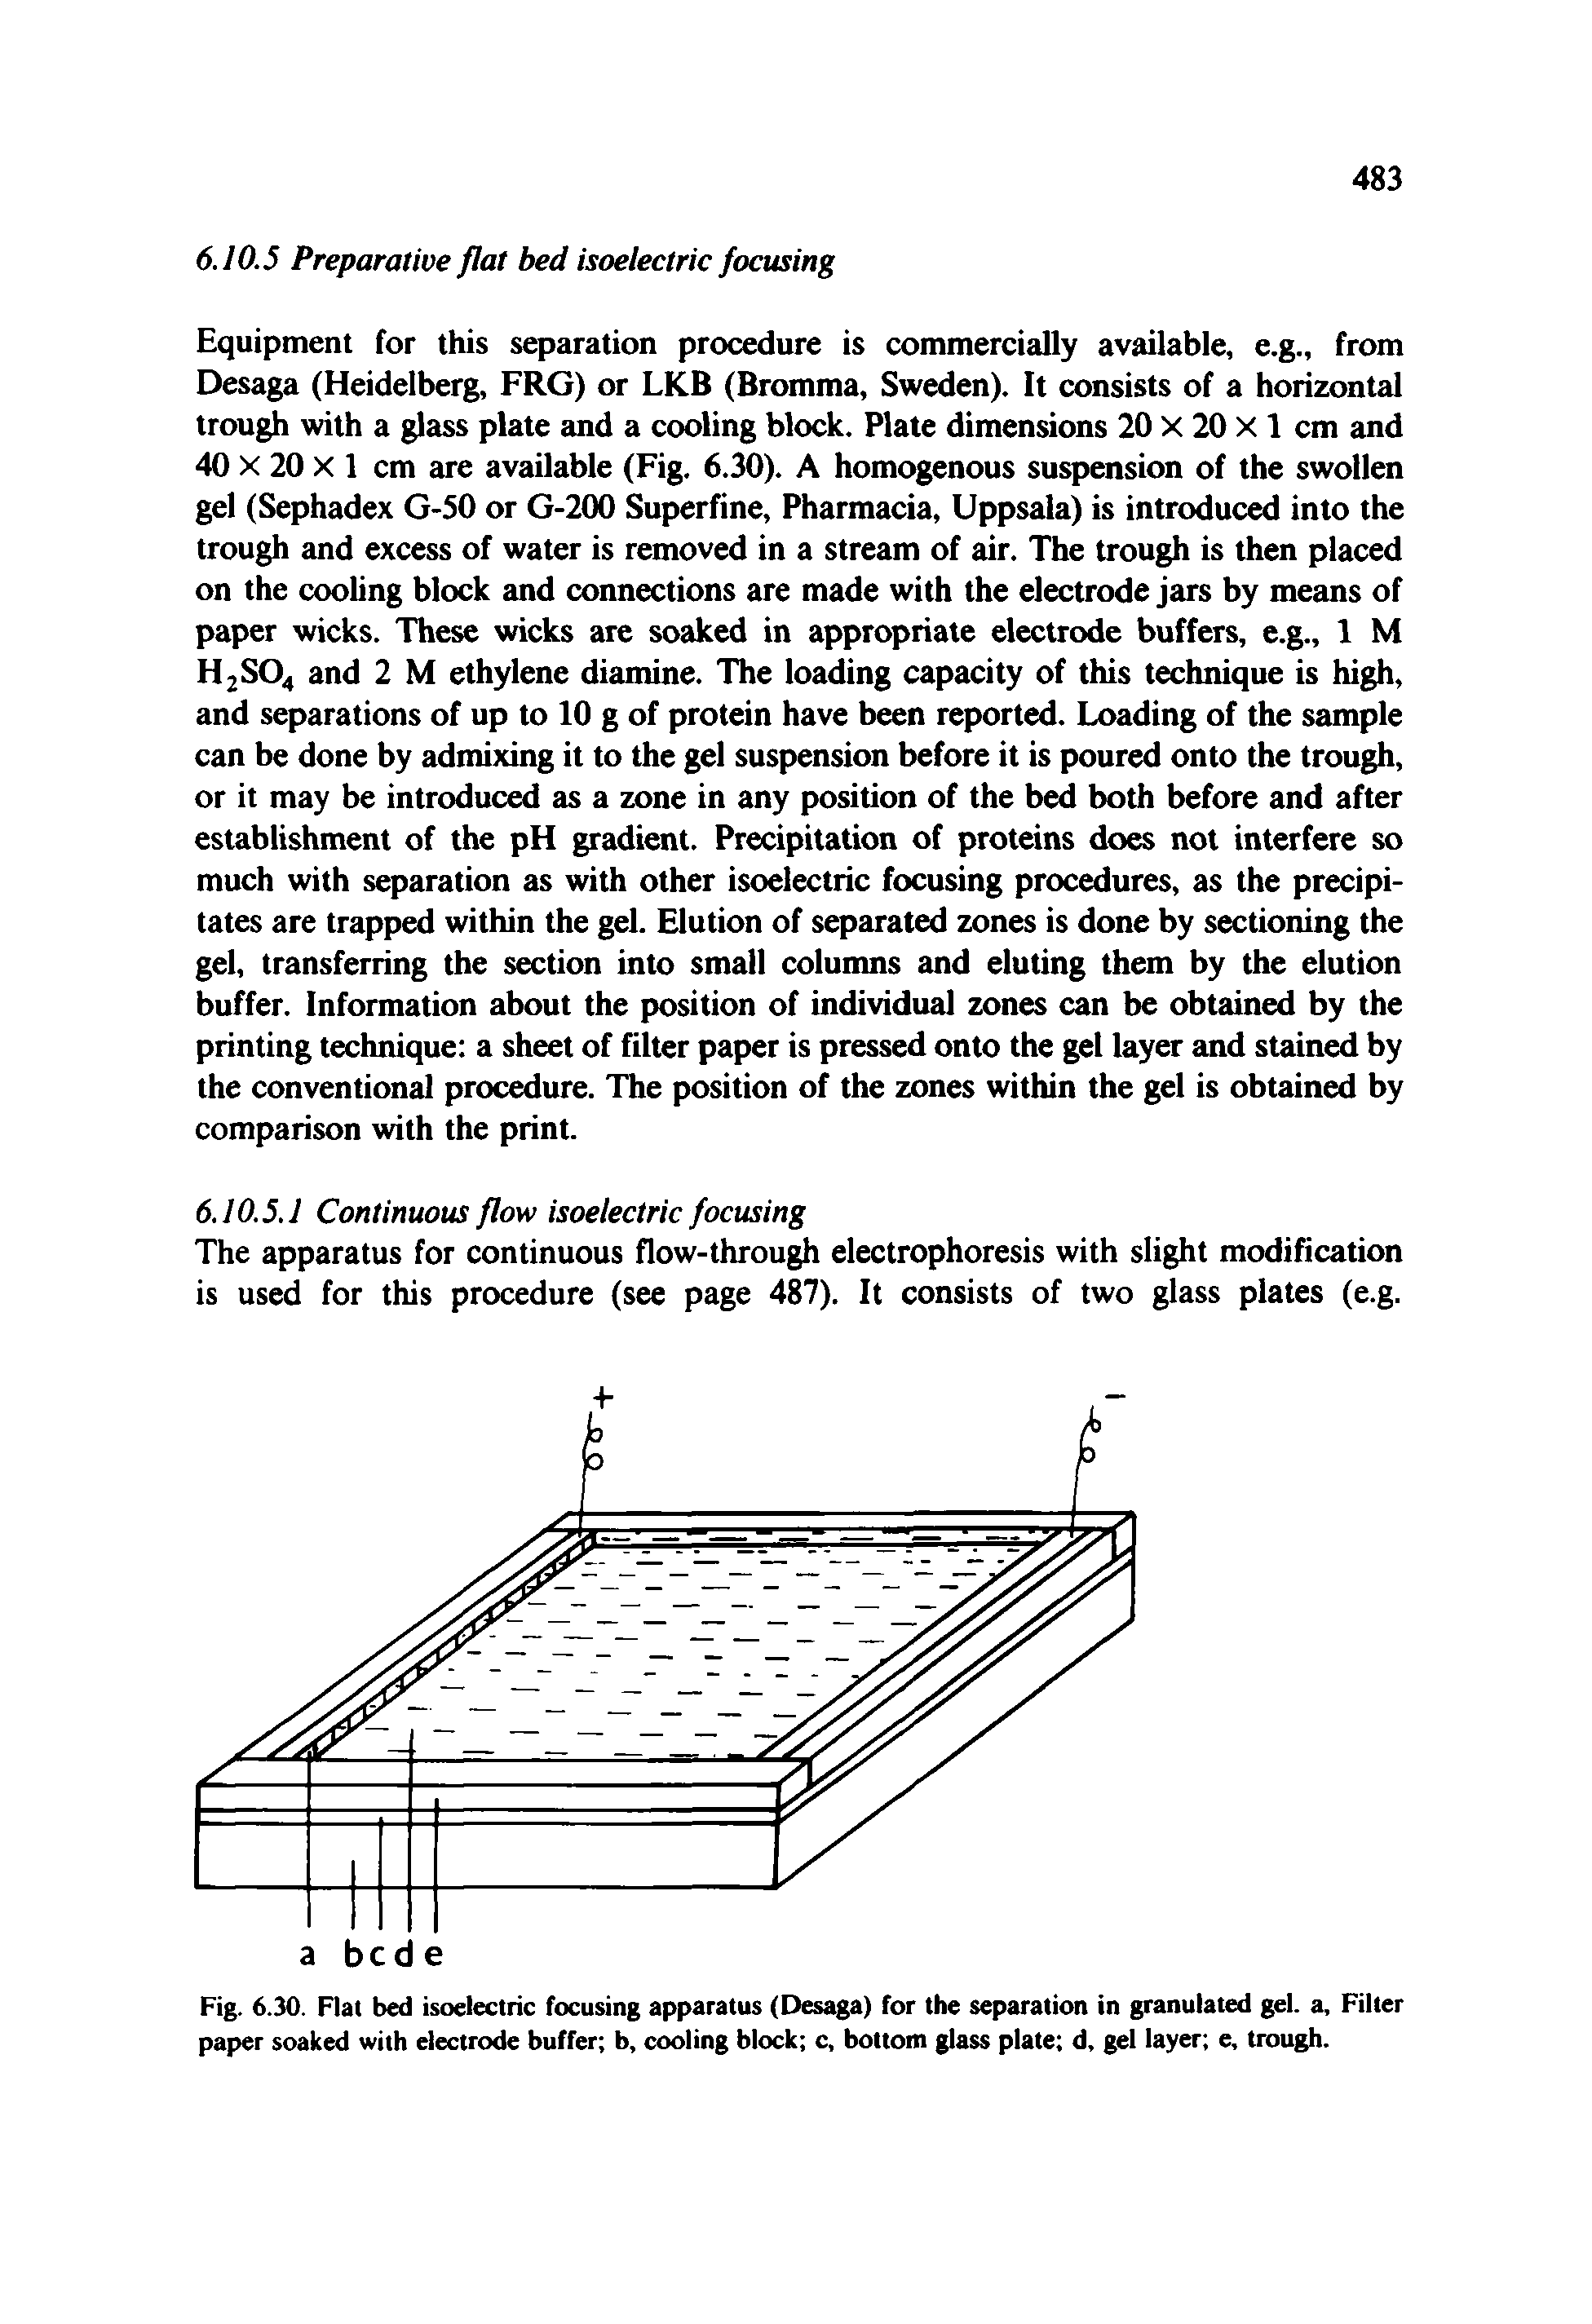 Fig. 6.30. Flat bed isoelectric focusing apparatus (Desaga) for the separation in granulated gel. a. Filter paper soaked with electrode buffer b, cooling block c, bottom glass plate d, gel layer e, trough.